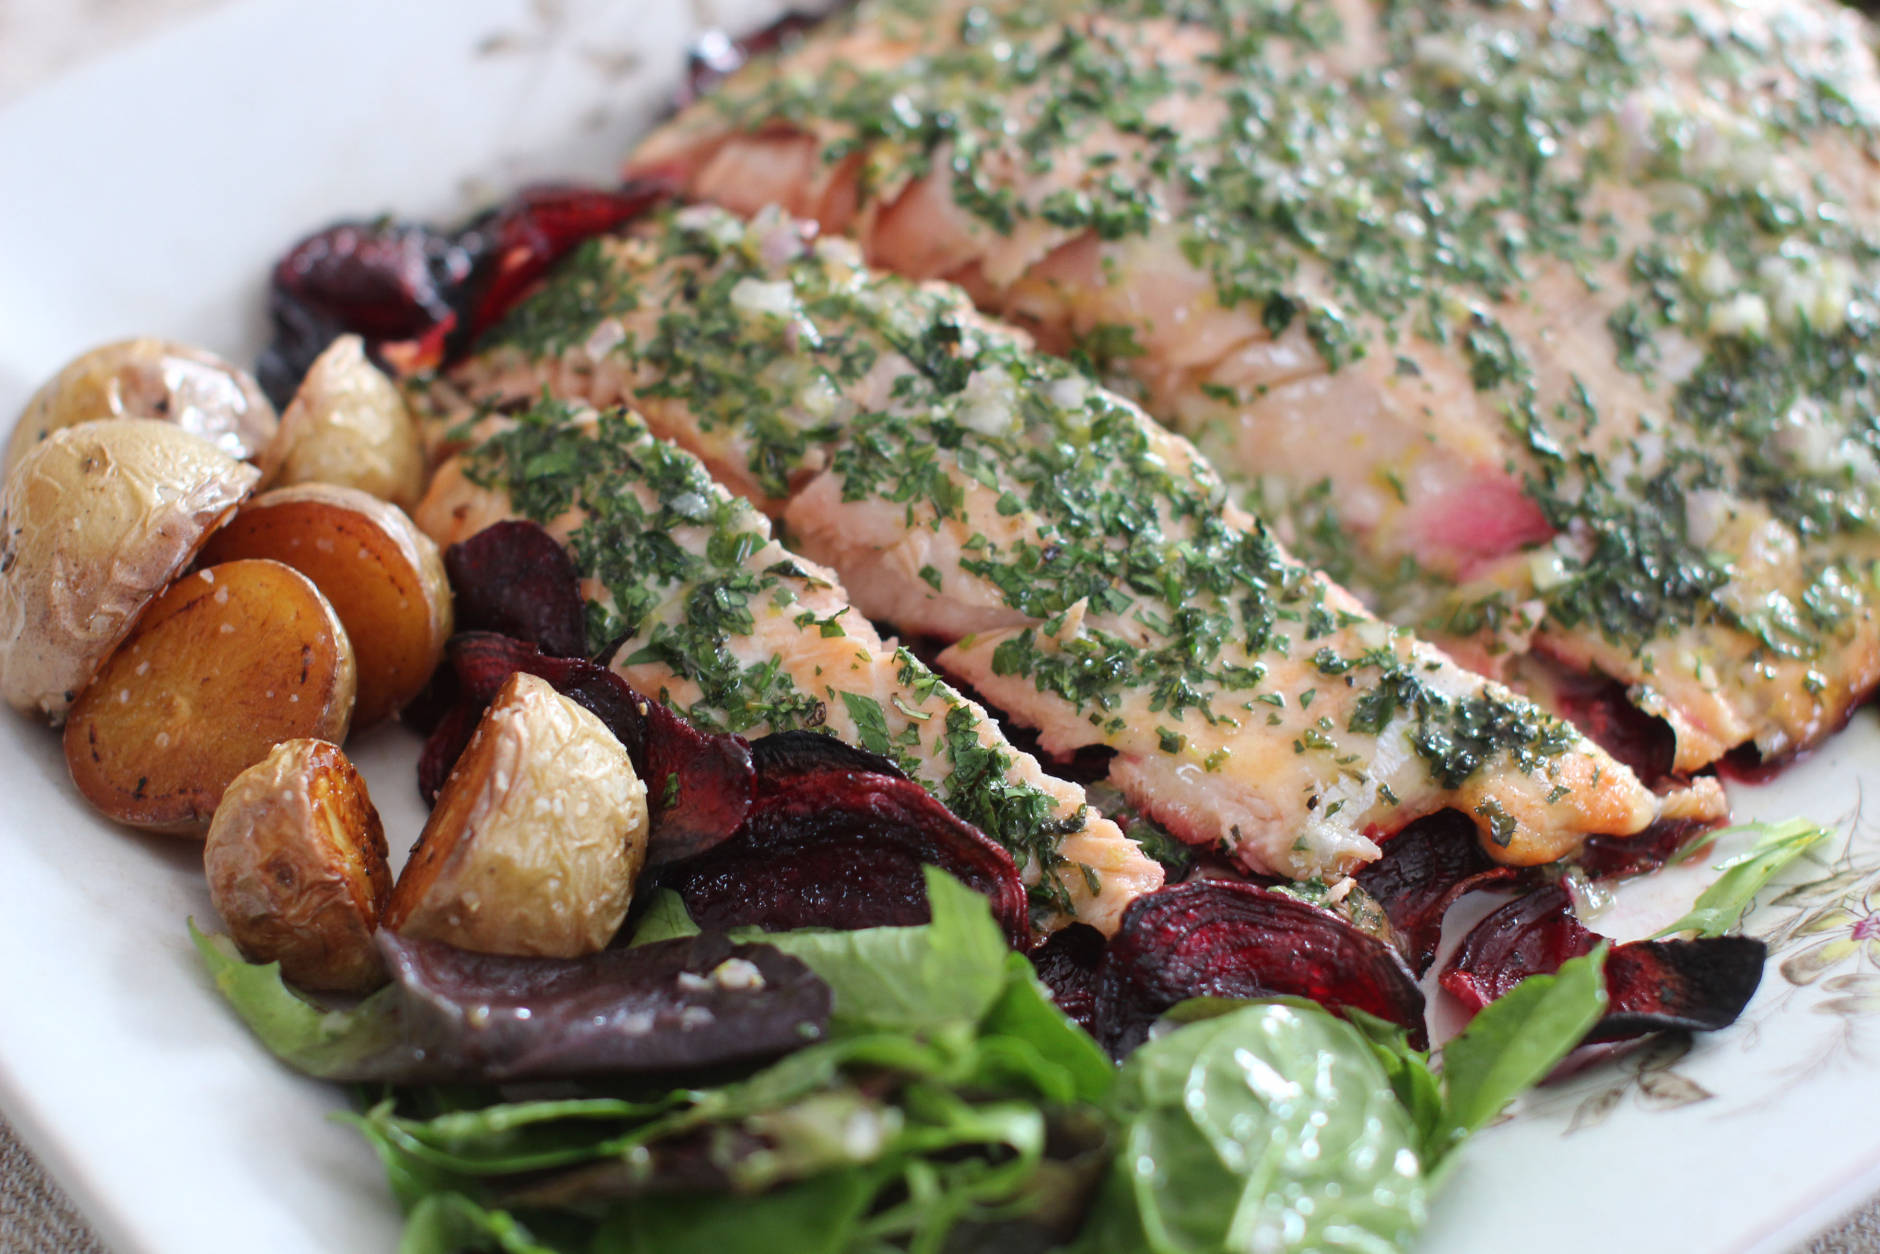 This Feb. 23, 2015 photo shows roasted salmon and beets with herb vinaigrette in Concord, N.H. (AP Photo/Matthew Mead)